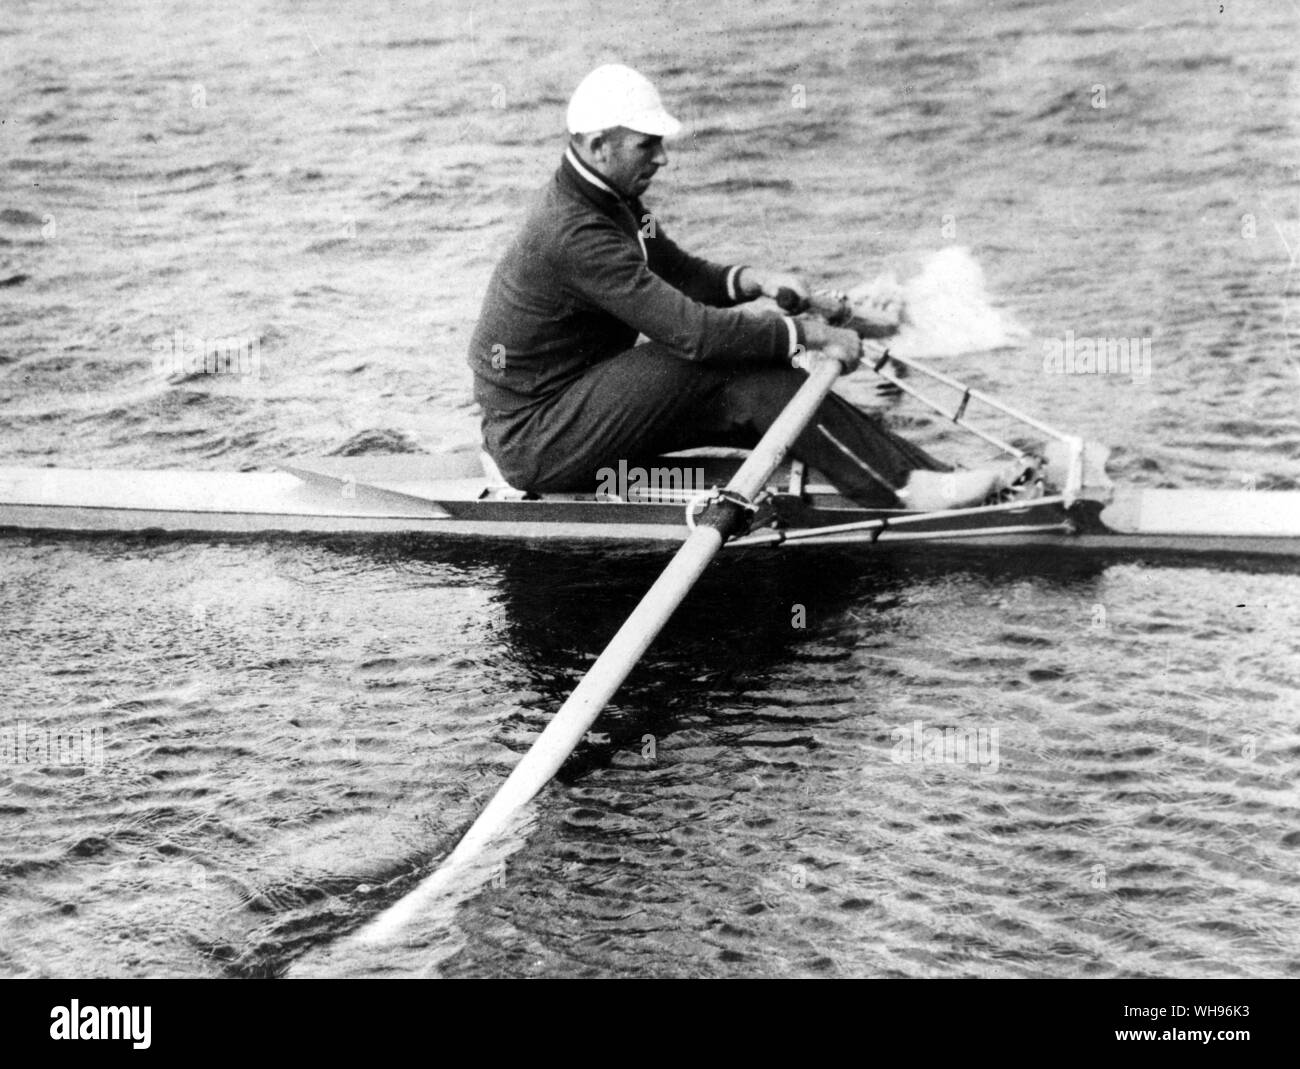 Aus., Melbourne, Olympics, 1956: Vyacheslav Ivanov won the gold medal in the single skull's rowing. Stock Photo